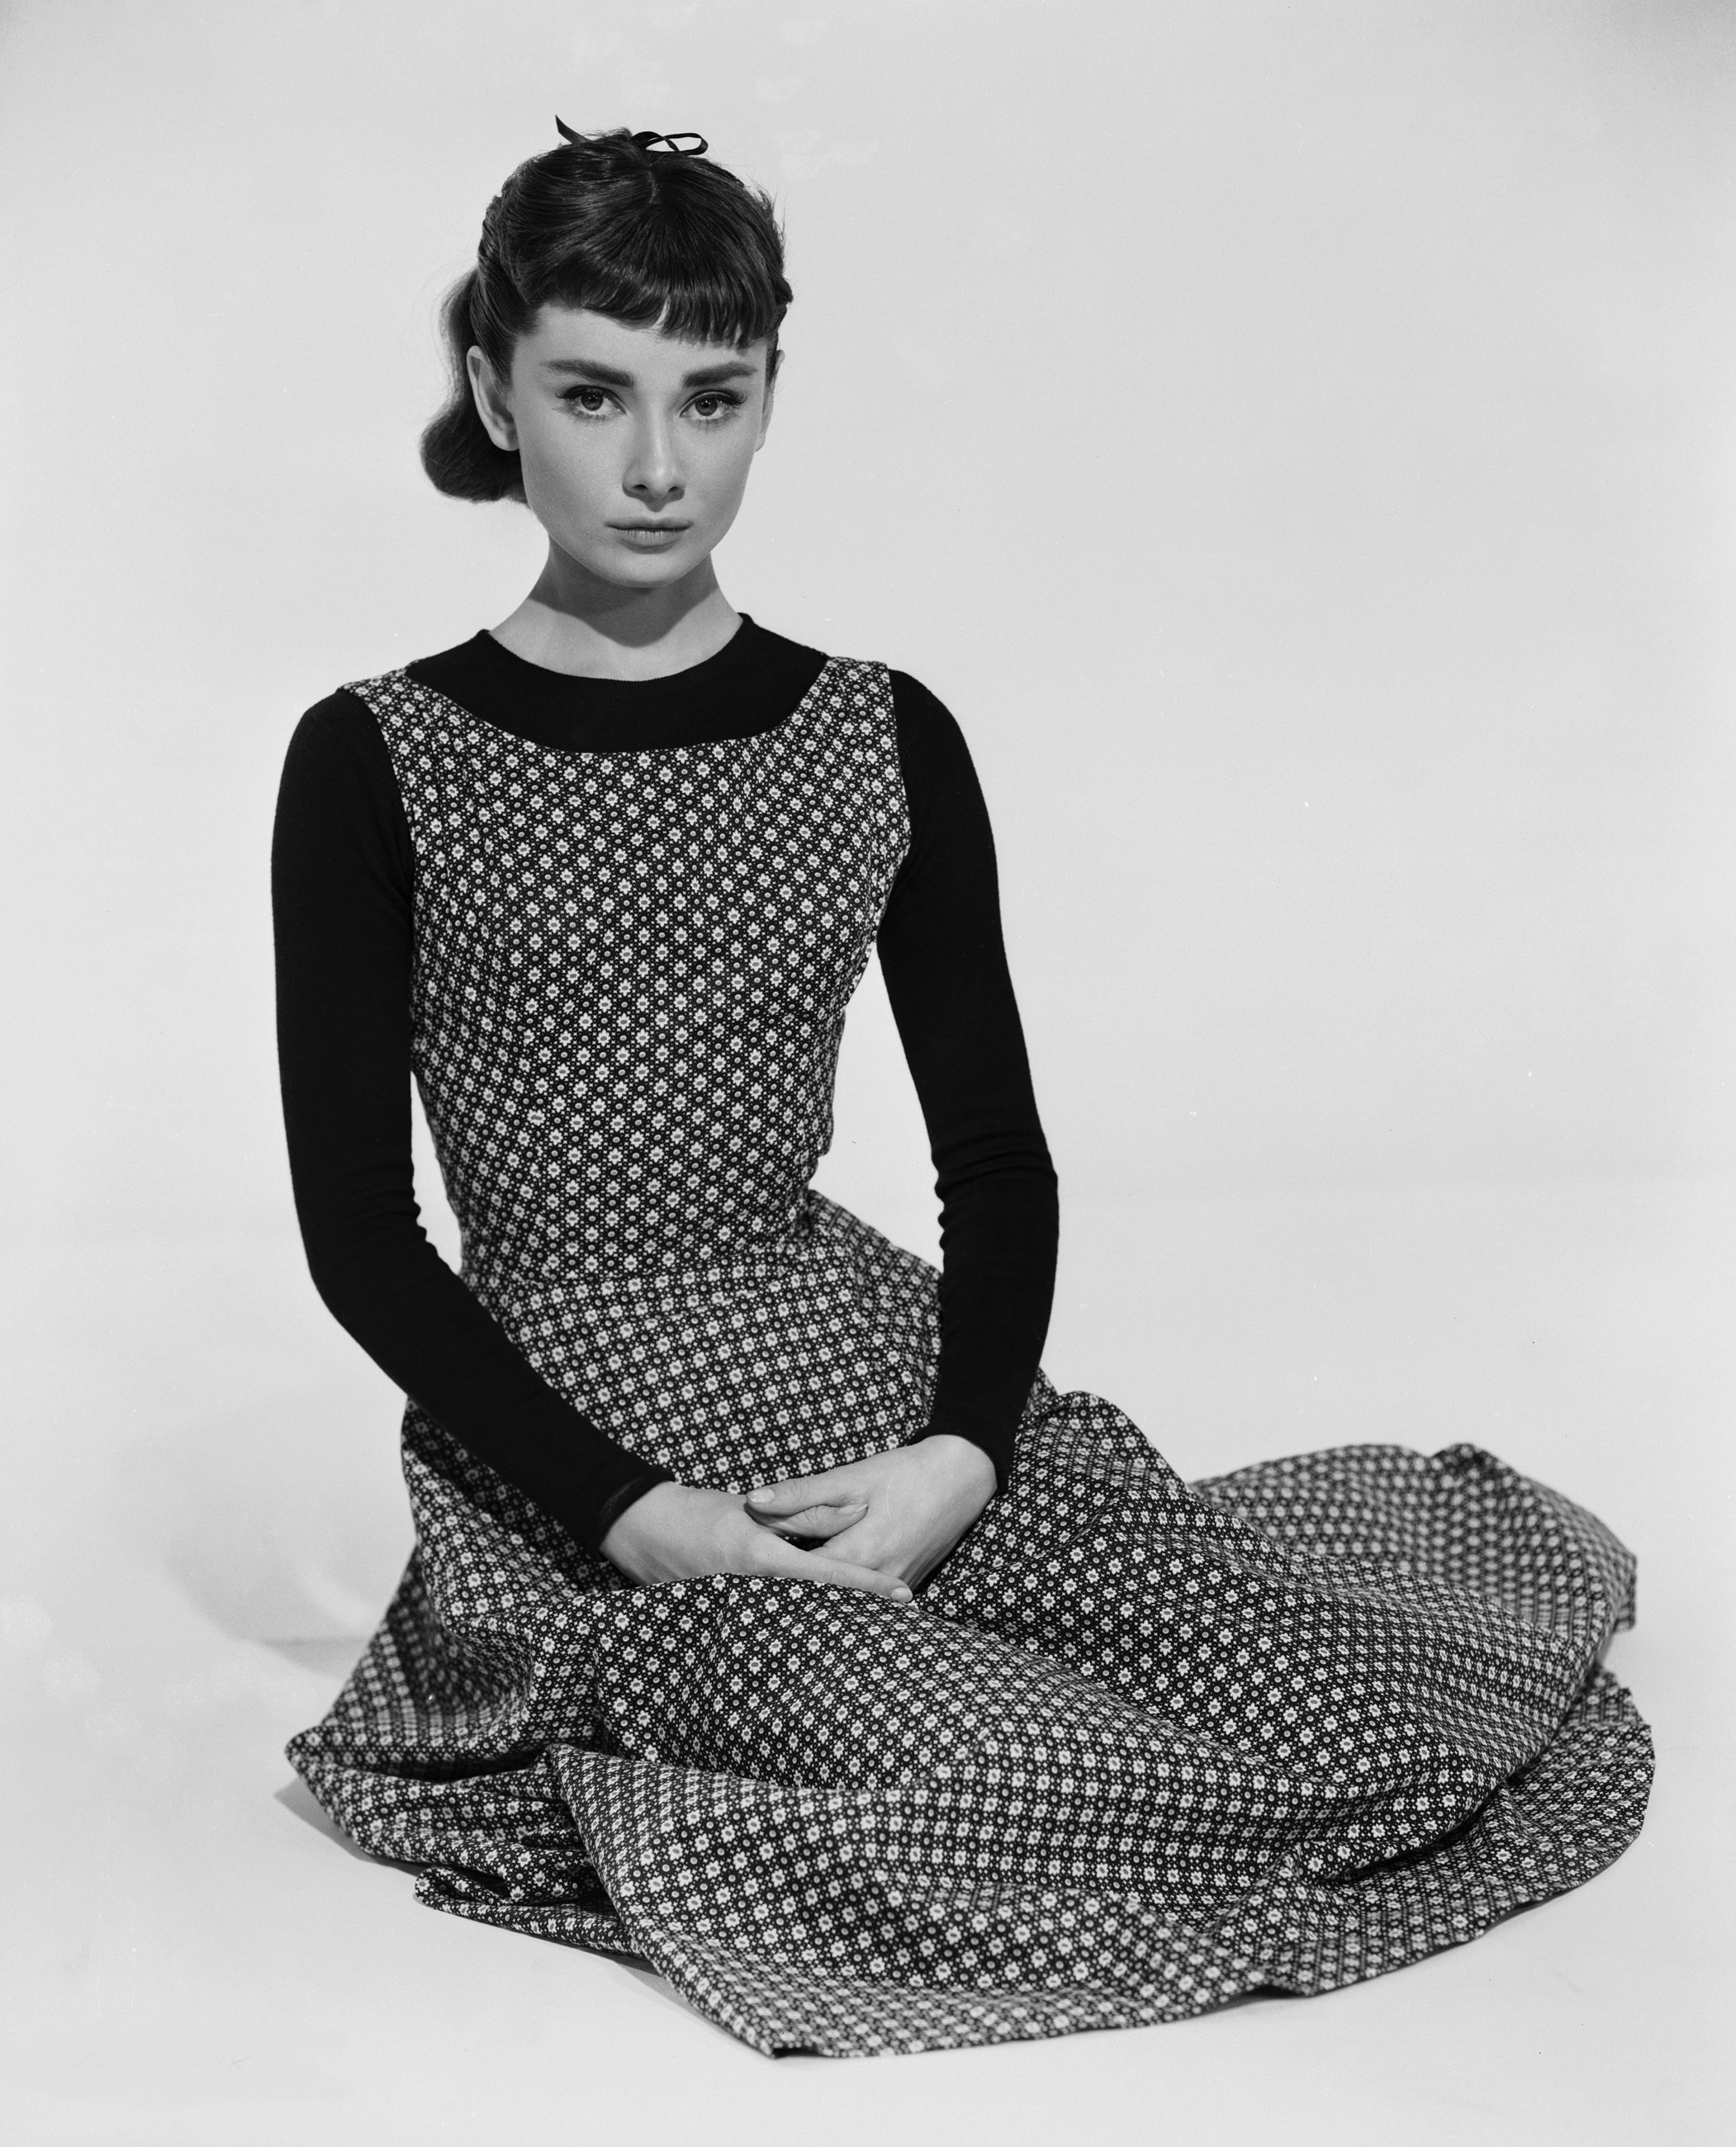 Style inspiration from Sabrina, Iconic fashion moments, Audrey Hepburn's chic looks, Timeless elegance, 2110x2600 HD Phone